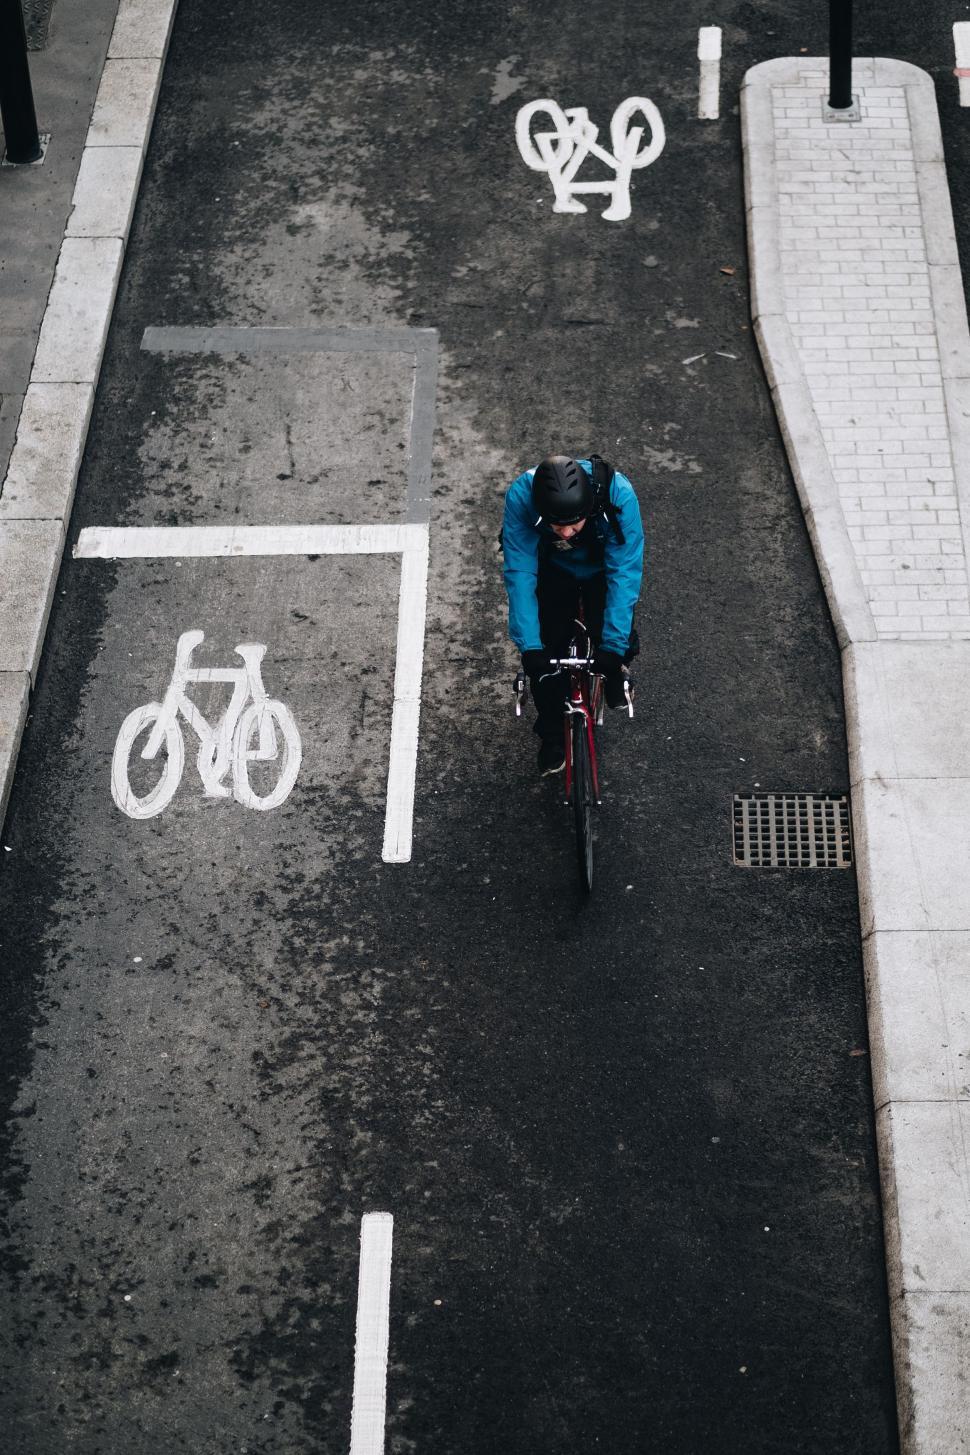 Free Image of Person Riding Bike in Parking Lot 